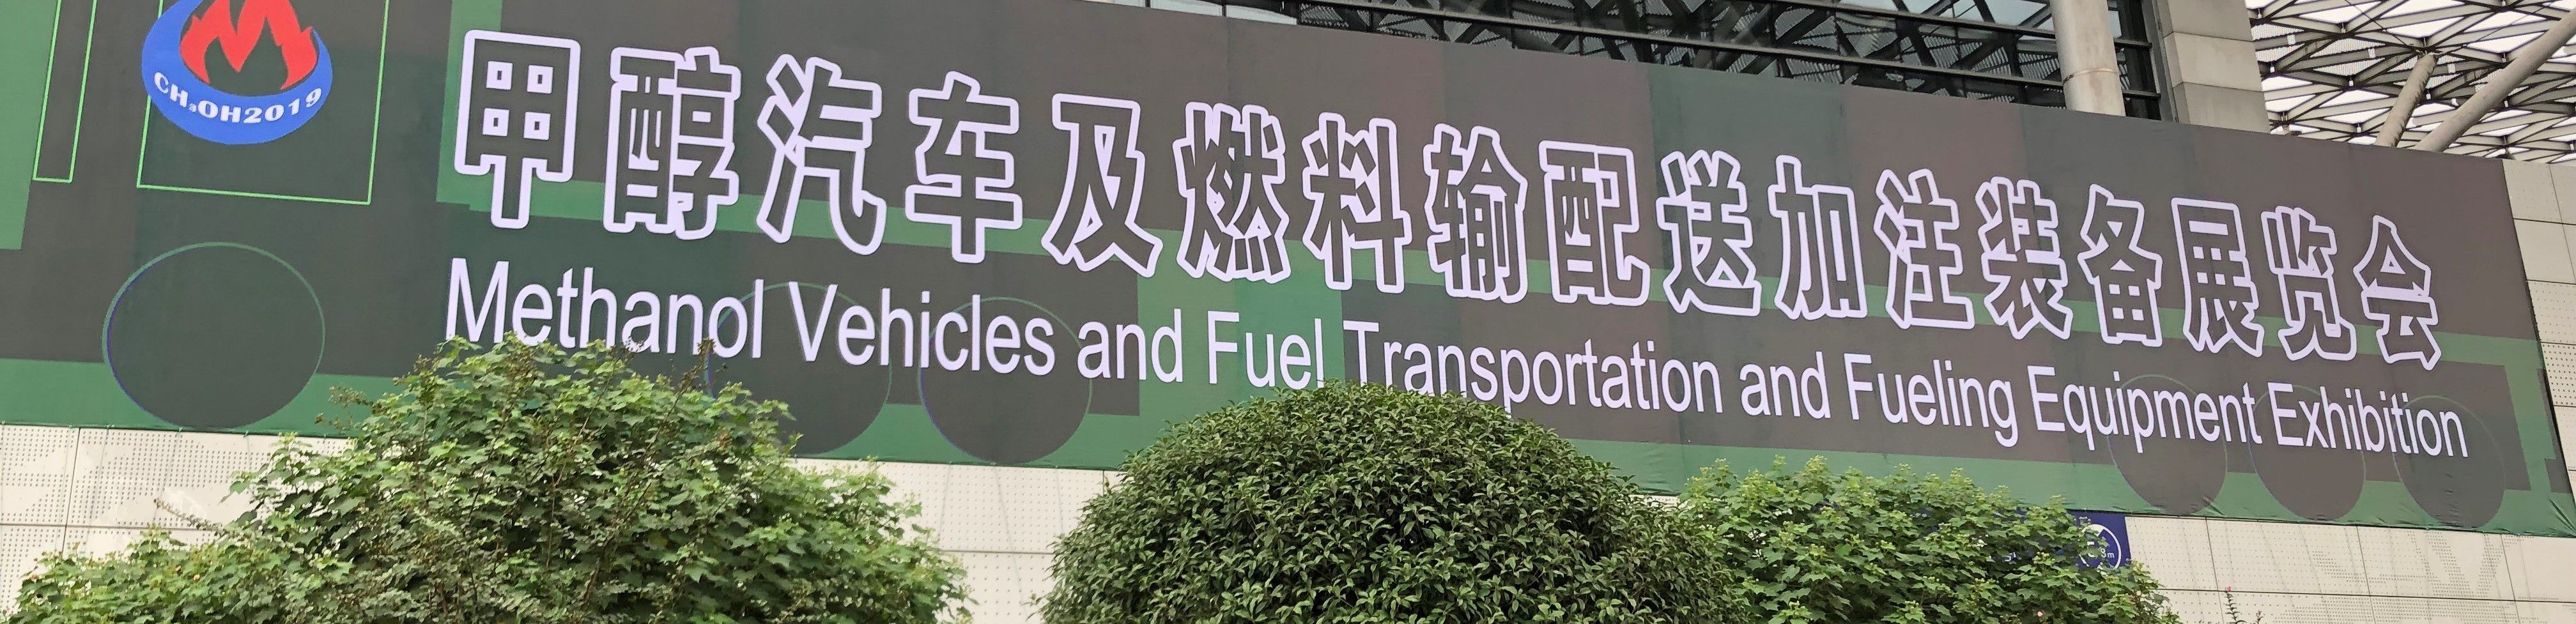 Methanol Vehicle and Fuel Transportation Exposition